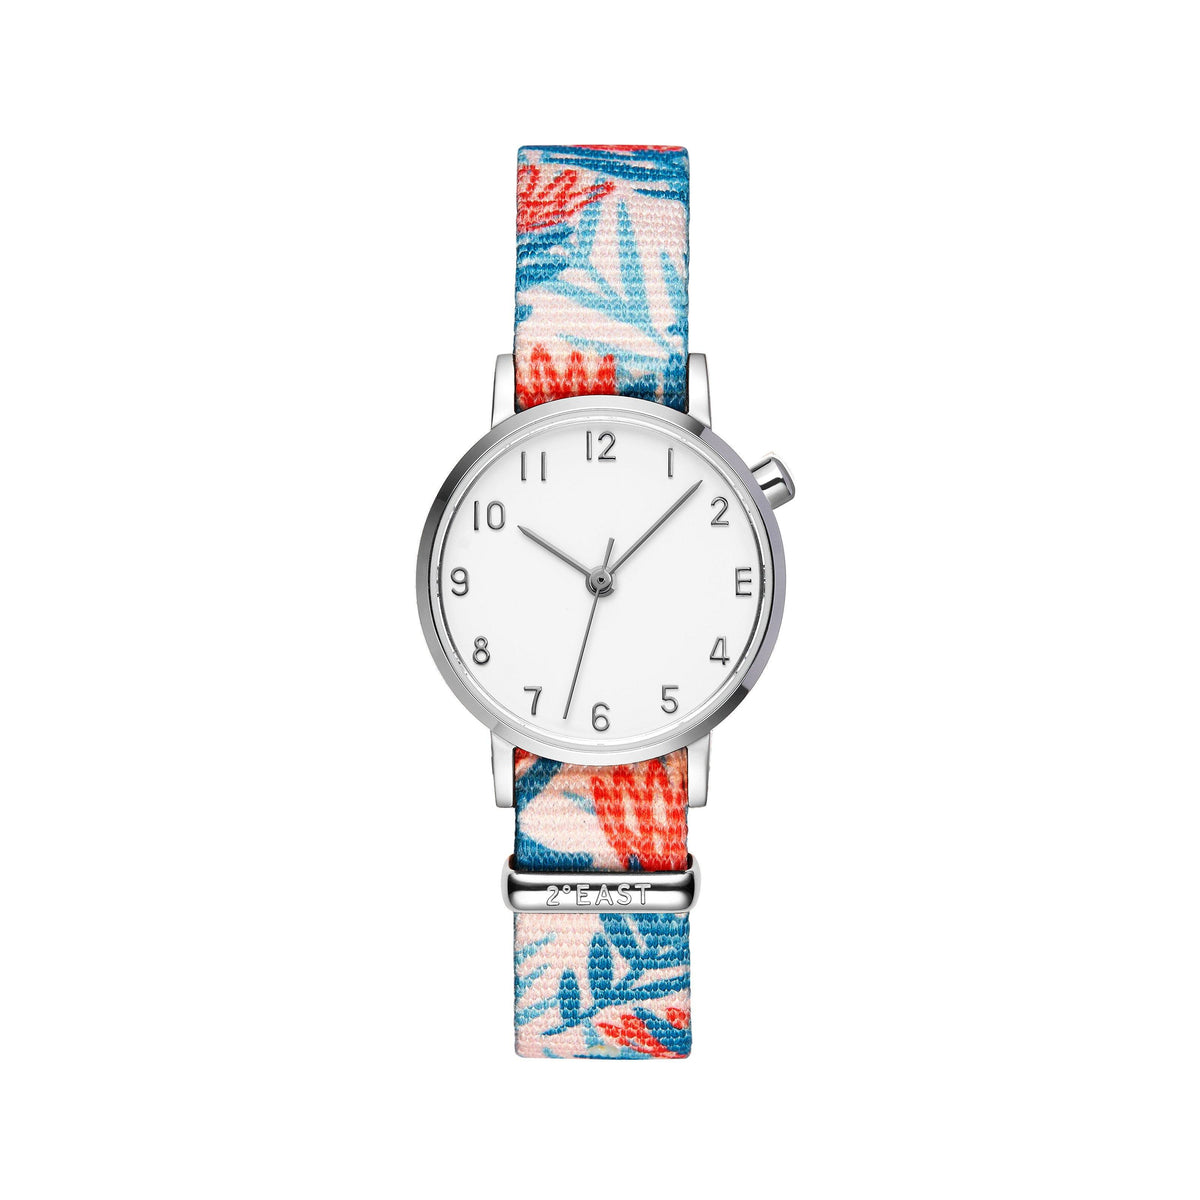 The White and Silver Watch - Protea (Kids)